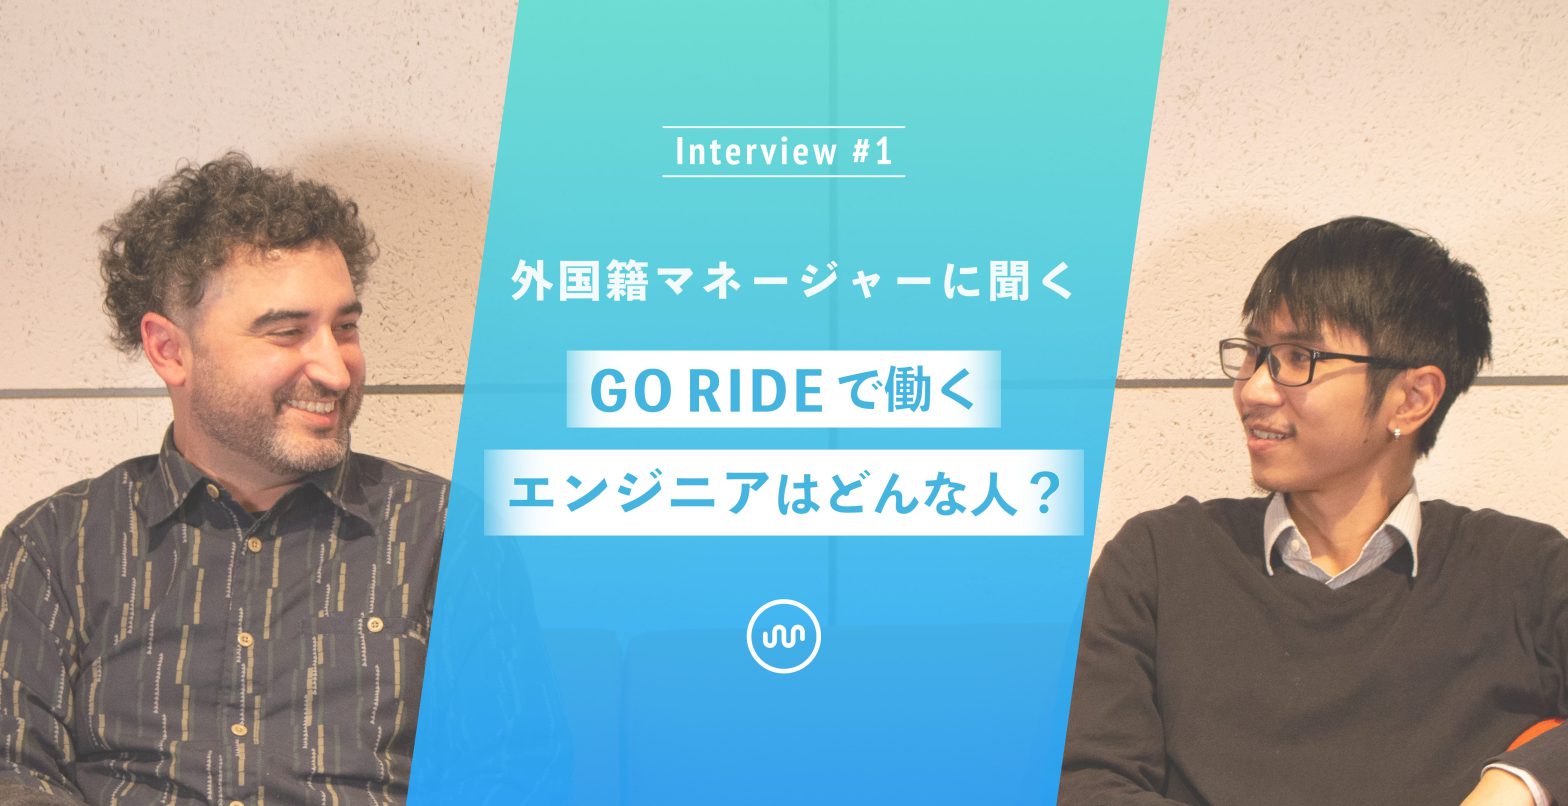 GO RIDEで働くエンジニアはどんな人？ ~Interview our Engineering Expert~